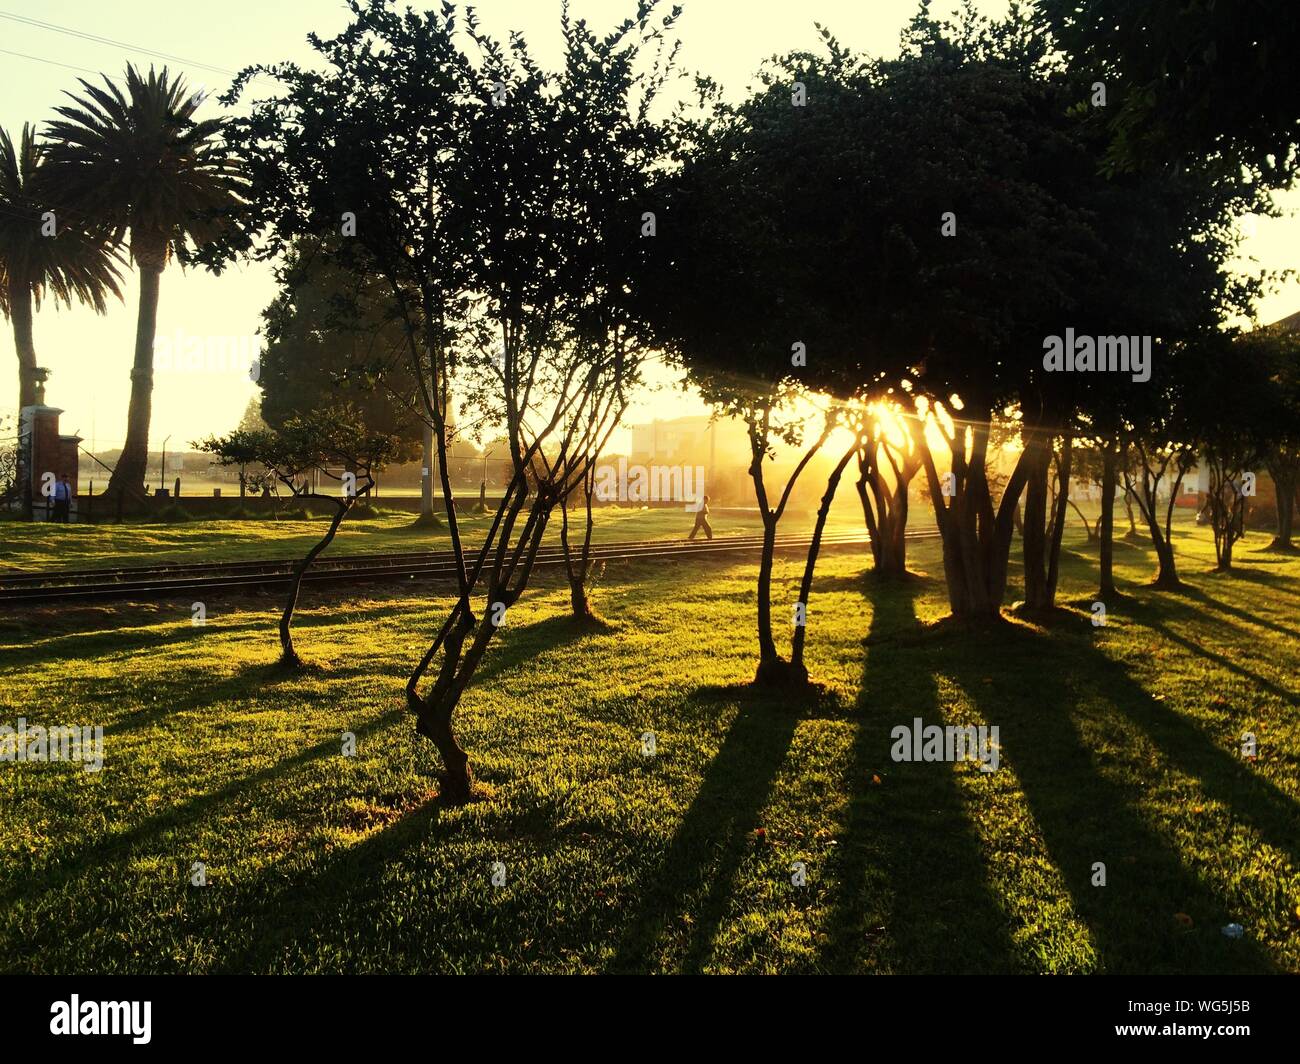 Grass And Silhouette Trees In Park At Sunrise Stock Photo